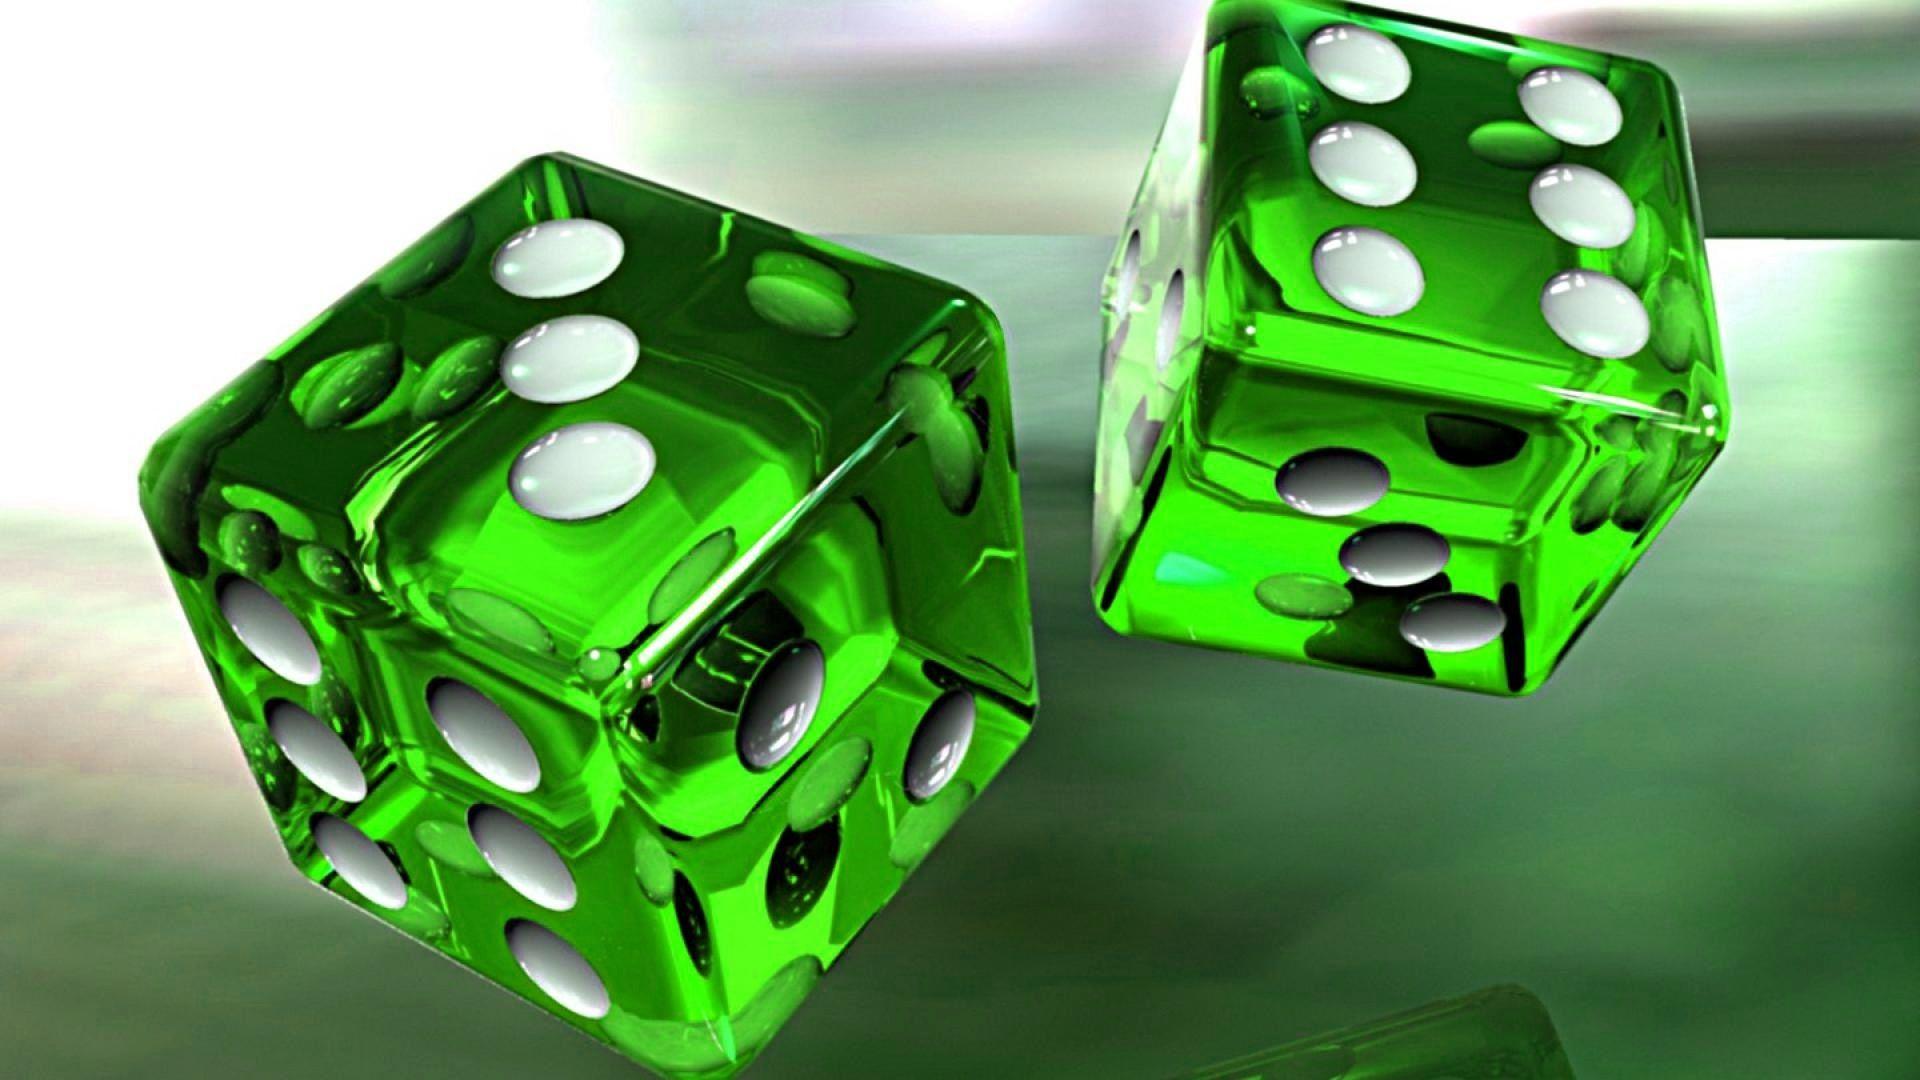 Ludo green Dice 3D background wallpaper and image Wallpaper